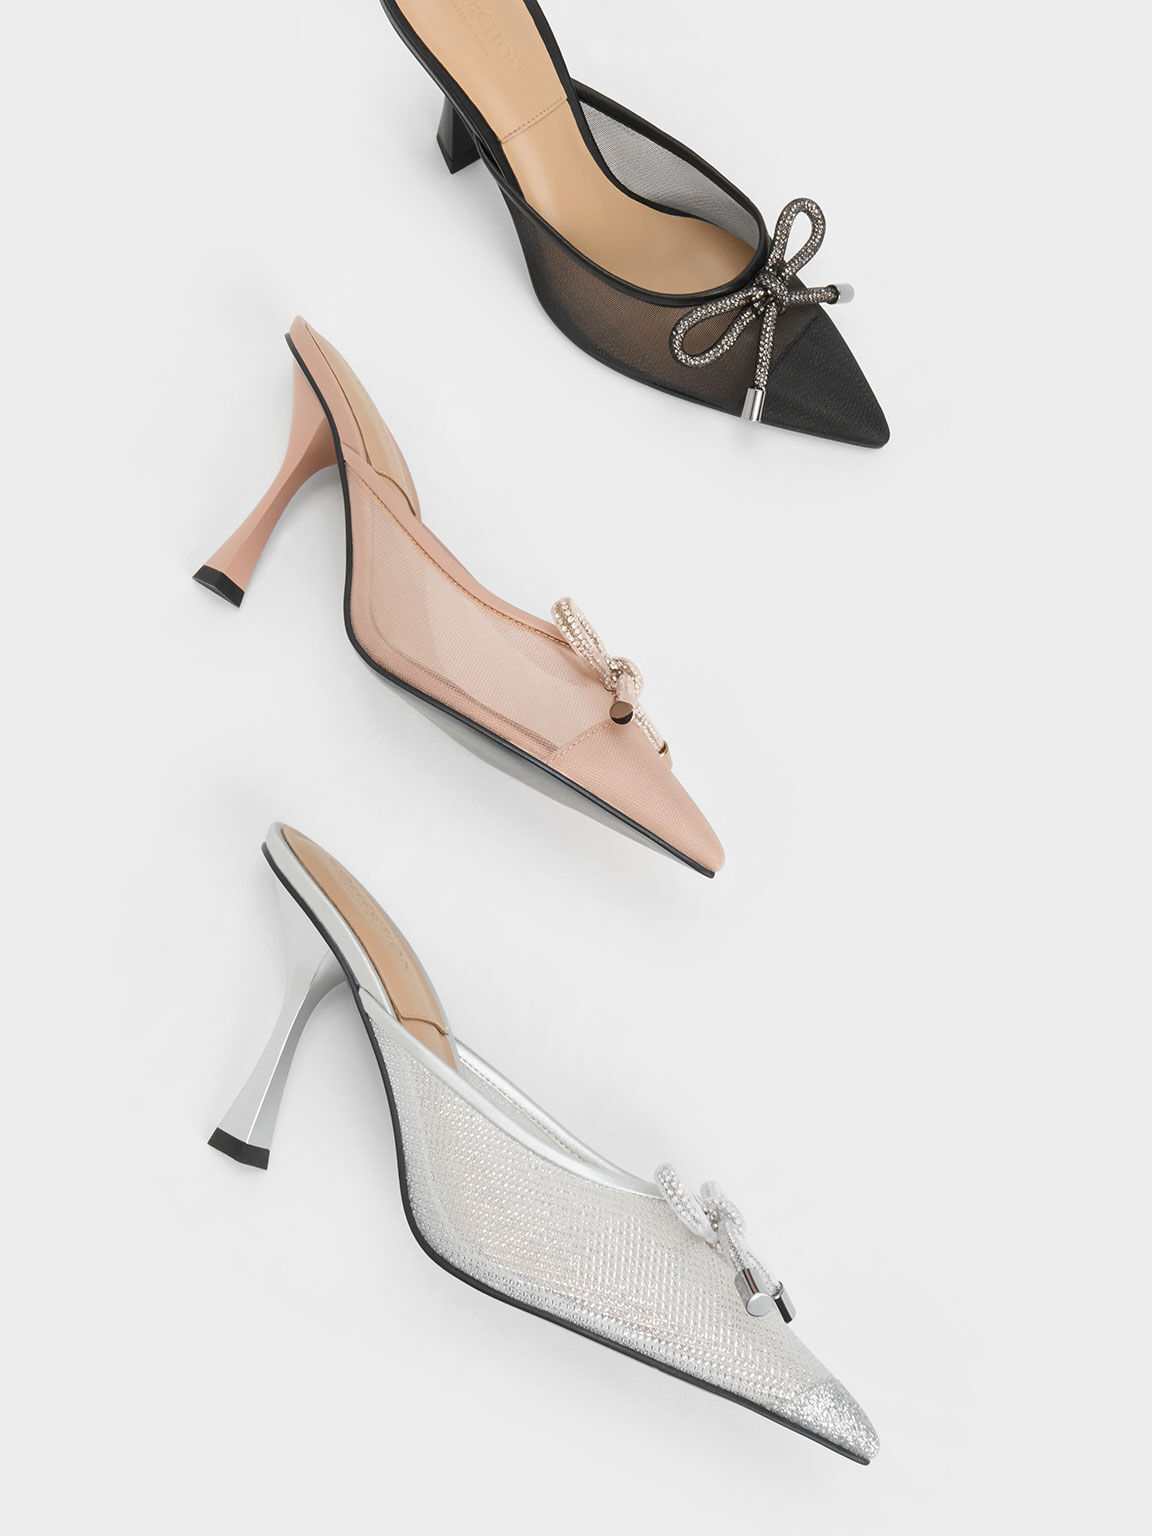 Bow-Tie Mesh Mules, Silver, hi-res